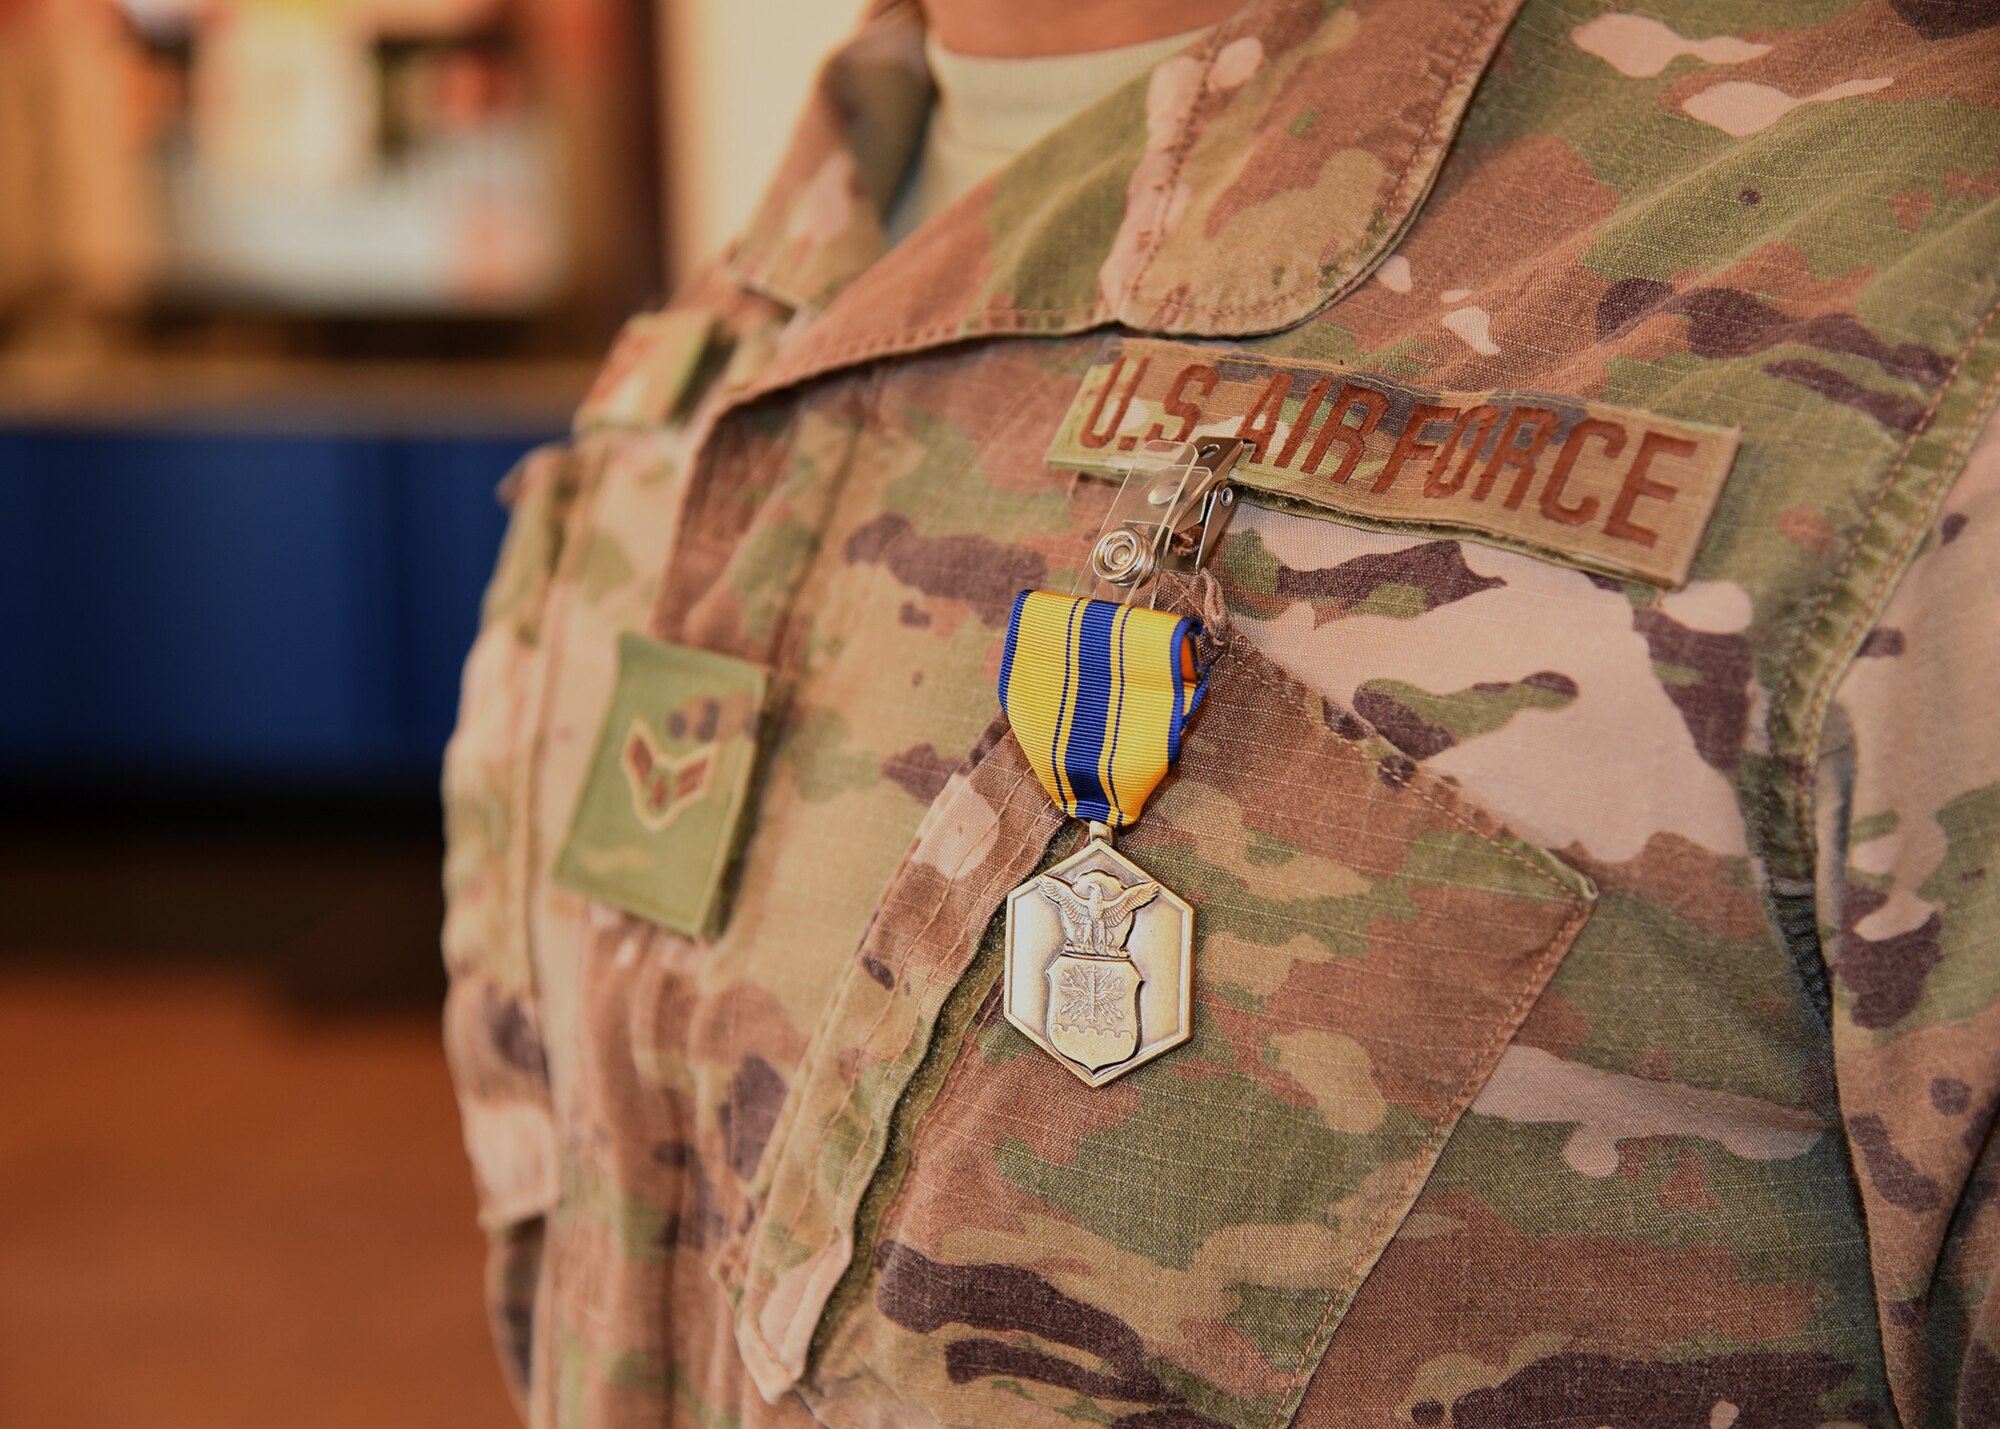 Airman 1st Class Christian Reid, 790th MSFS Defender, displays his recently earned Air Force Commendation Award l during a ceremony Nov. 15, 2019, at the Base Theater on F. E. Warren Air Force Base, Wyo. Horton received the commendation for actions taken in rescuing a family in danger of a house fire Nov. 7 in Dix, Nebraska. Reid was recognized alongside his teammate, Airman 1st Class Christopher Horton. (Air Force photo by Glenn S. Robertson)